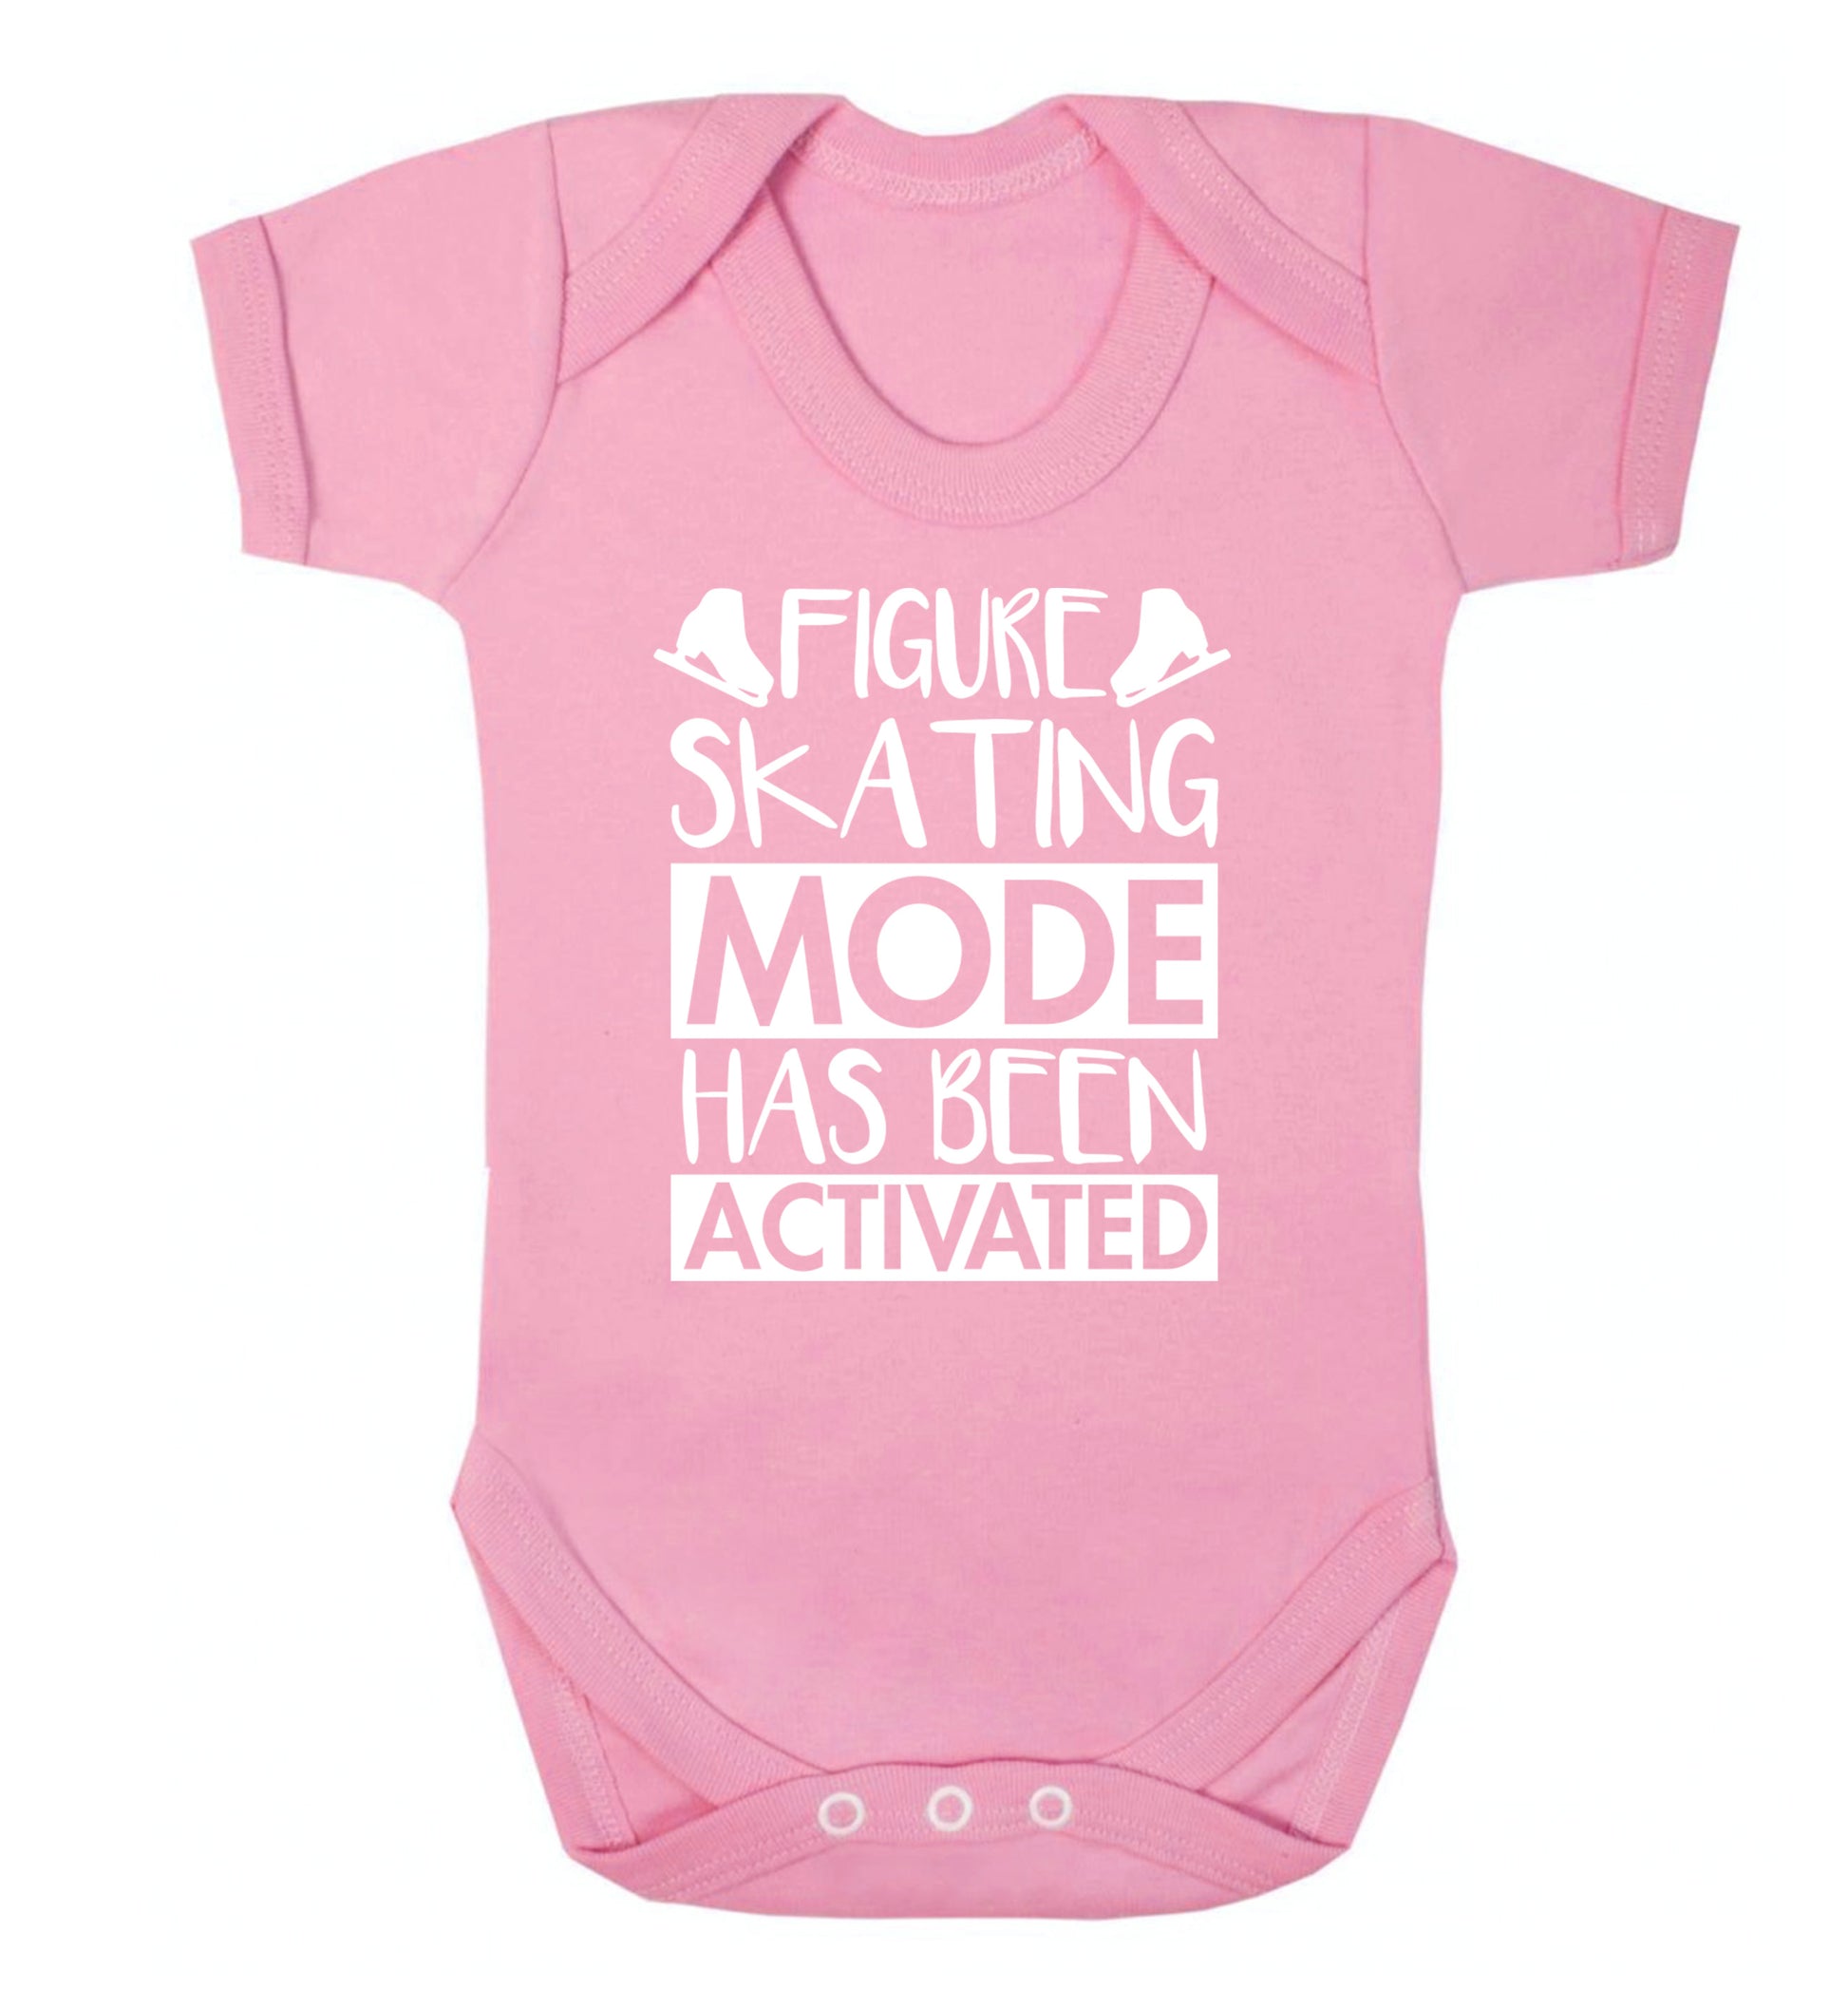 Figure skating mode activated Baby Vest pale pink 18-24 months